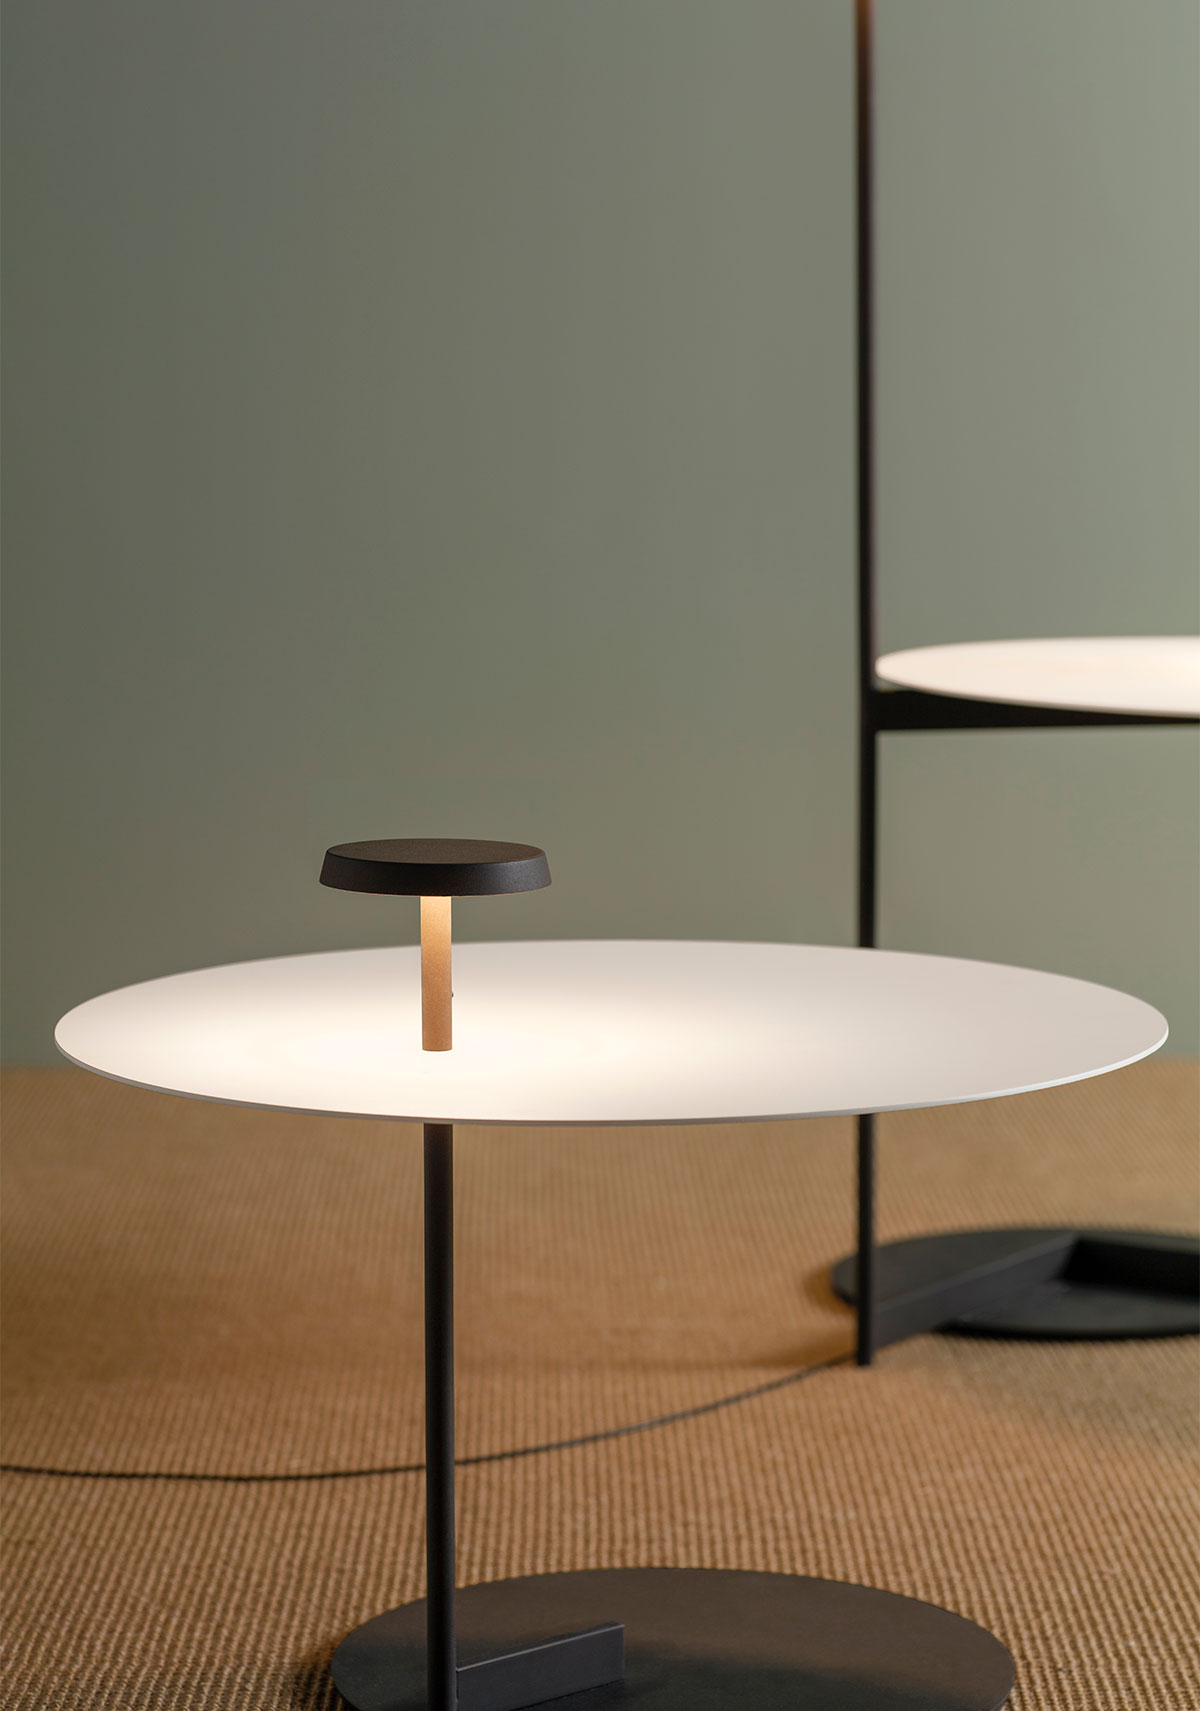 Vibia The Edit - Play With... Flat